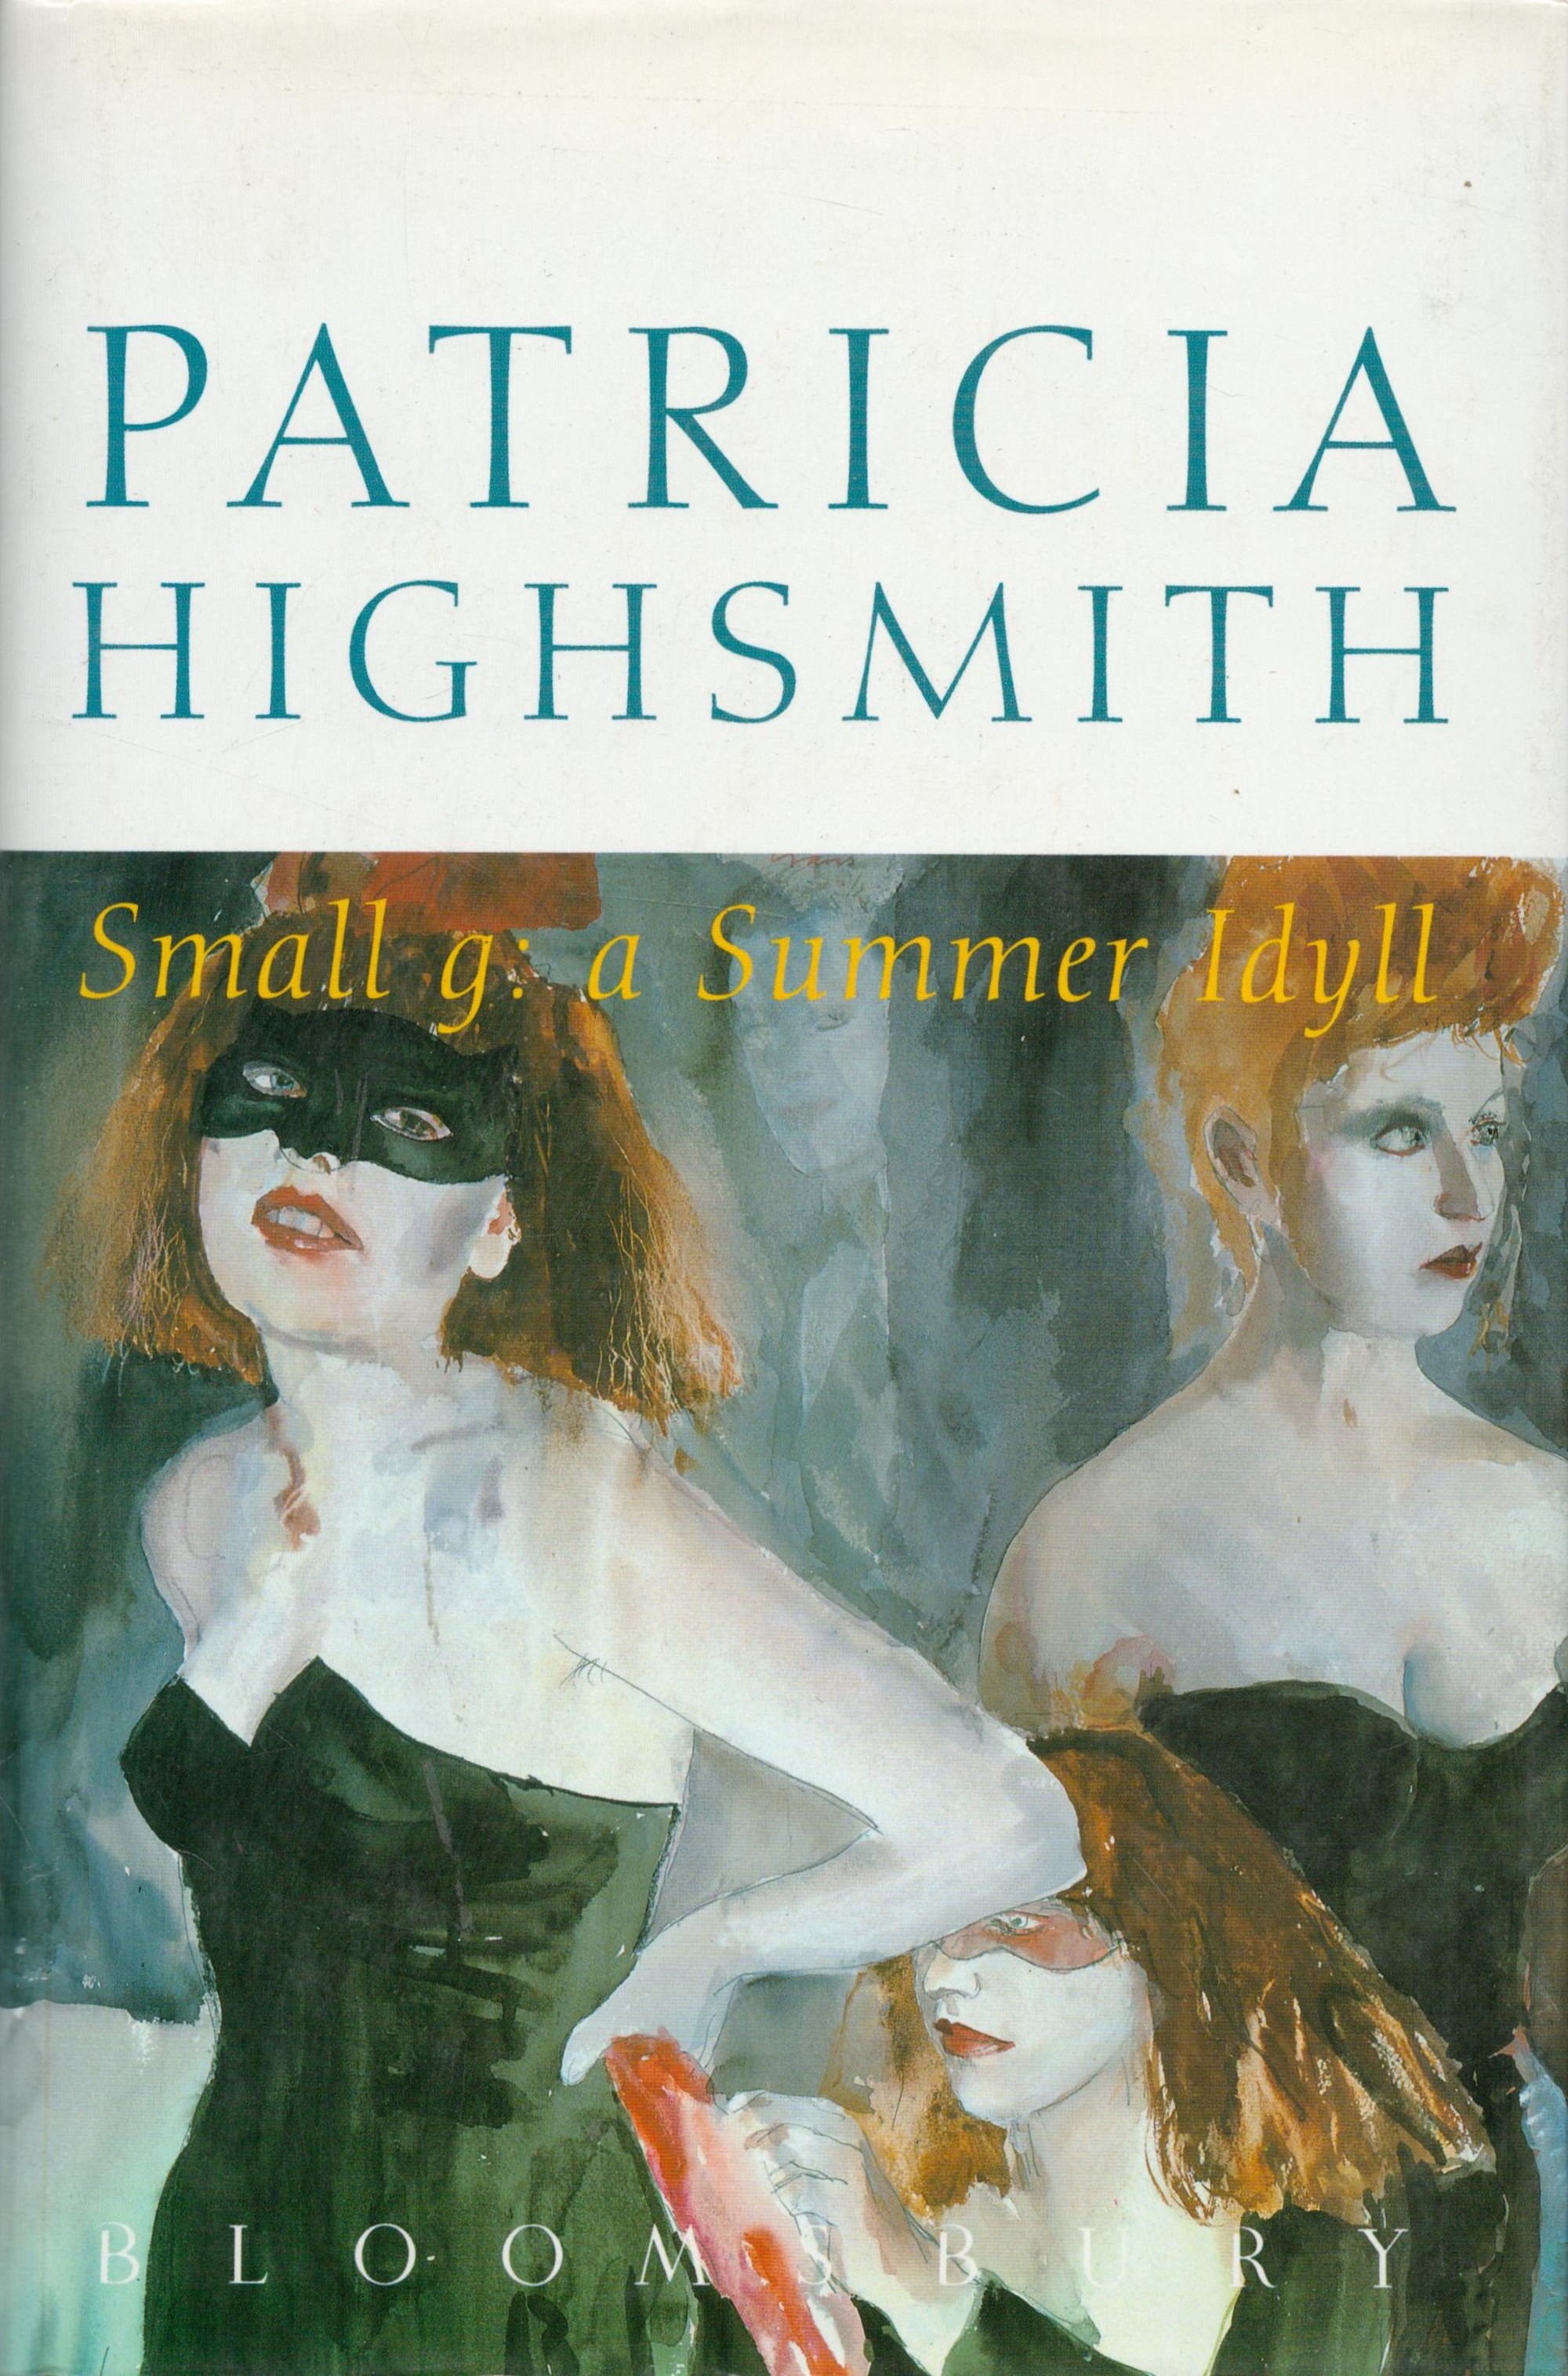 Patricia Highsmith Small g: a Summer Idyll Fine with complete Dust Jacket, Wrapper Hardback 1st